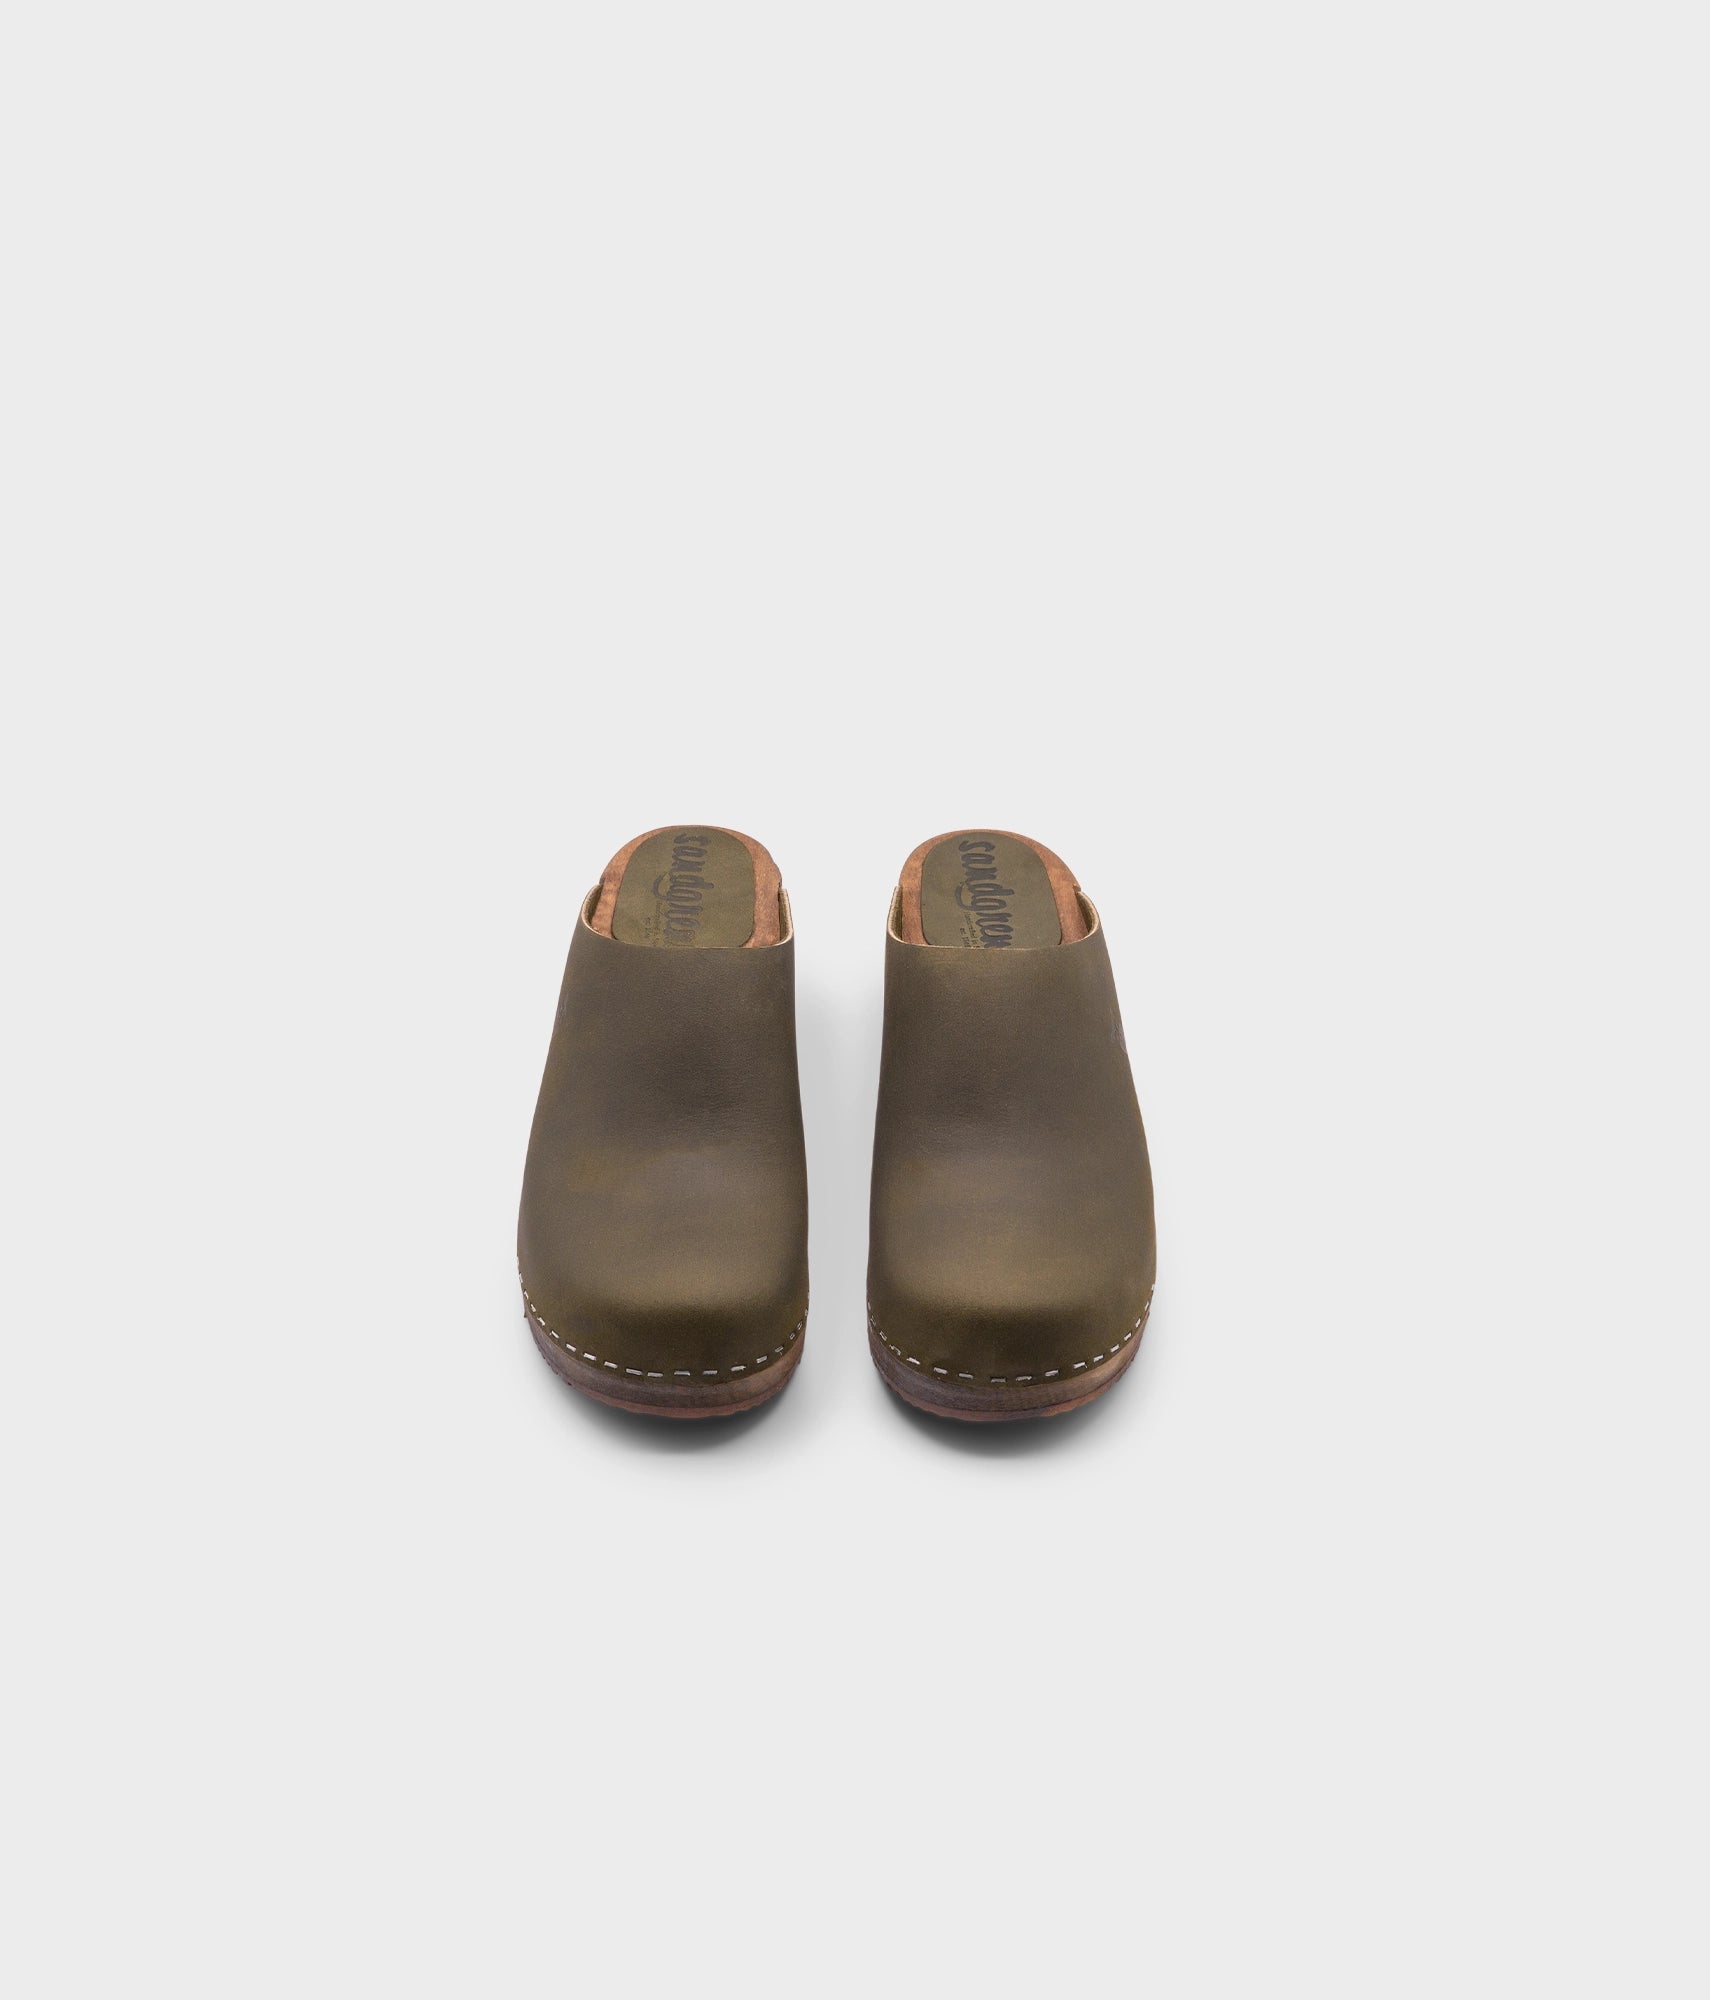 low heeled minimalistic clog mules in olive nubuck leather stapled on a dark wooden base